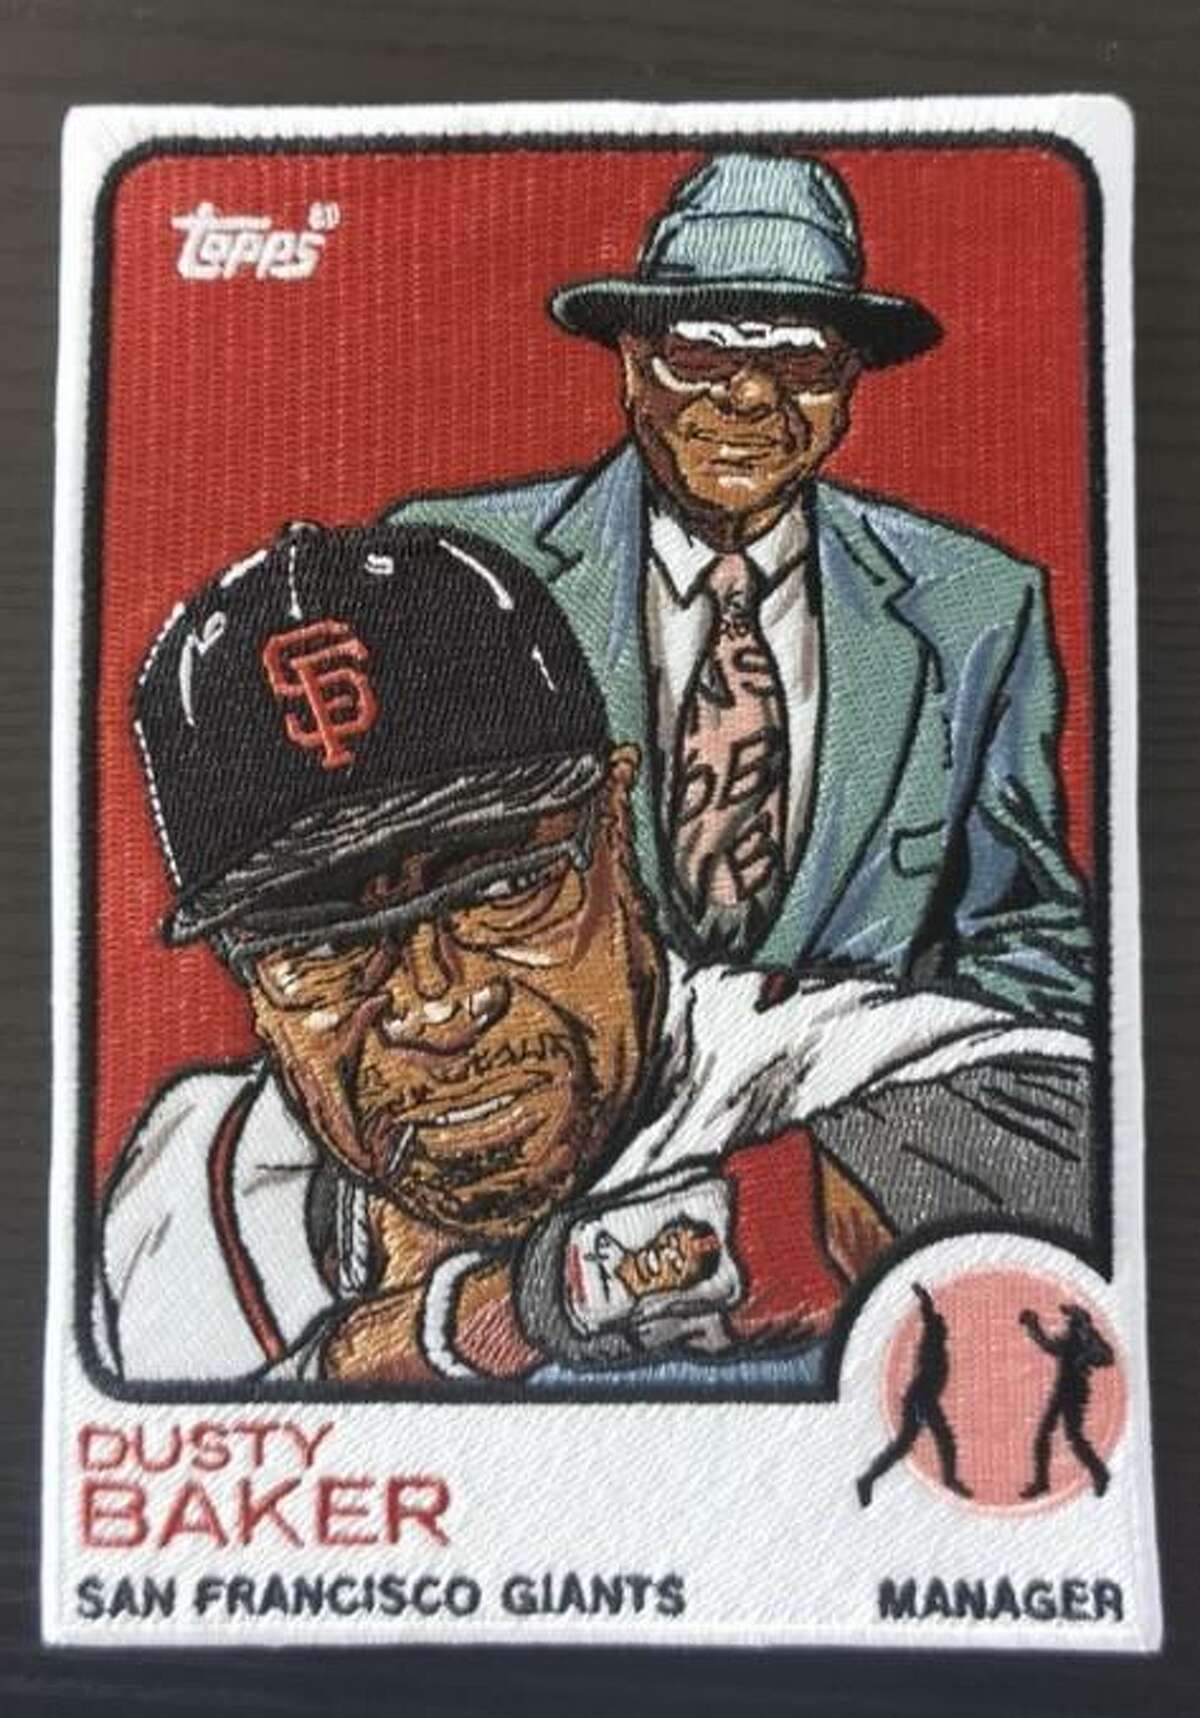 On Father’s Day, Astros skipper Dusty Baker will wear this customized wristband based on a photo from his time managing the San Francisco Giants. In the background is his father, Johnnie Baker Sr.